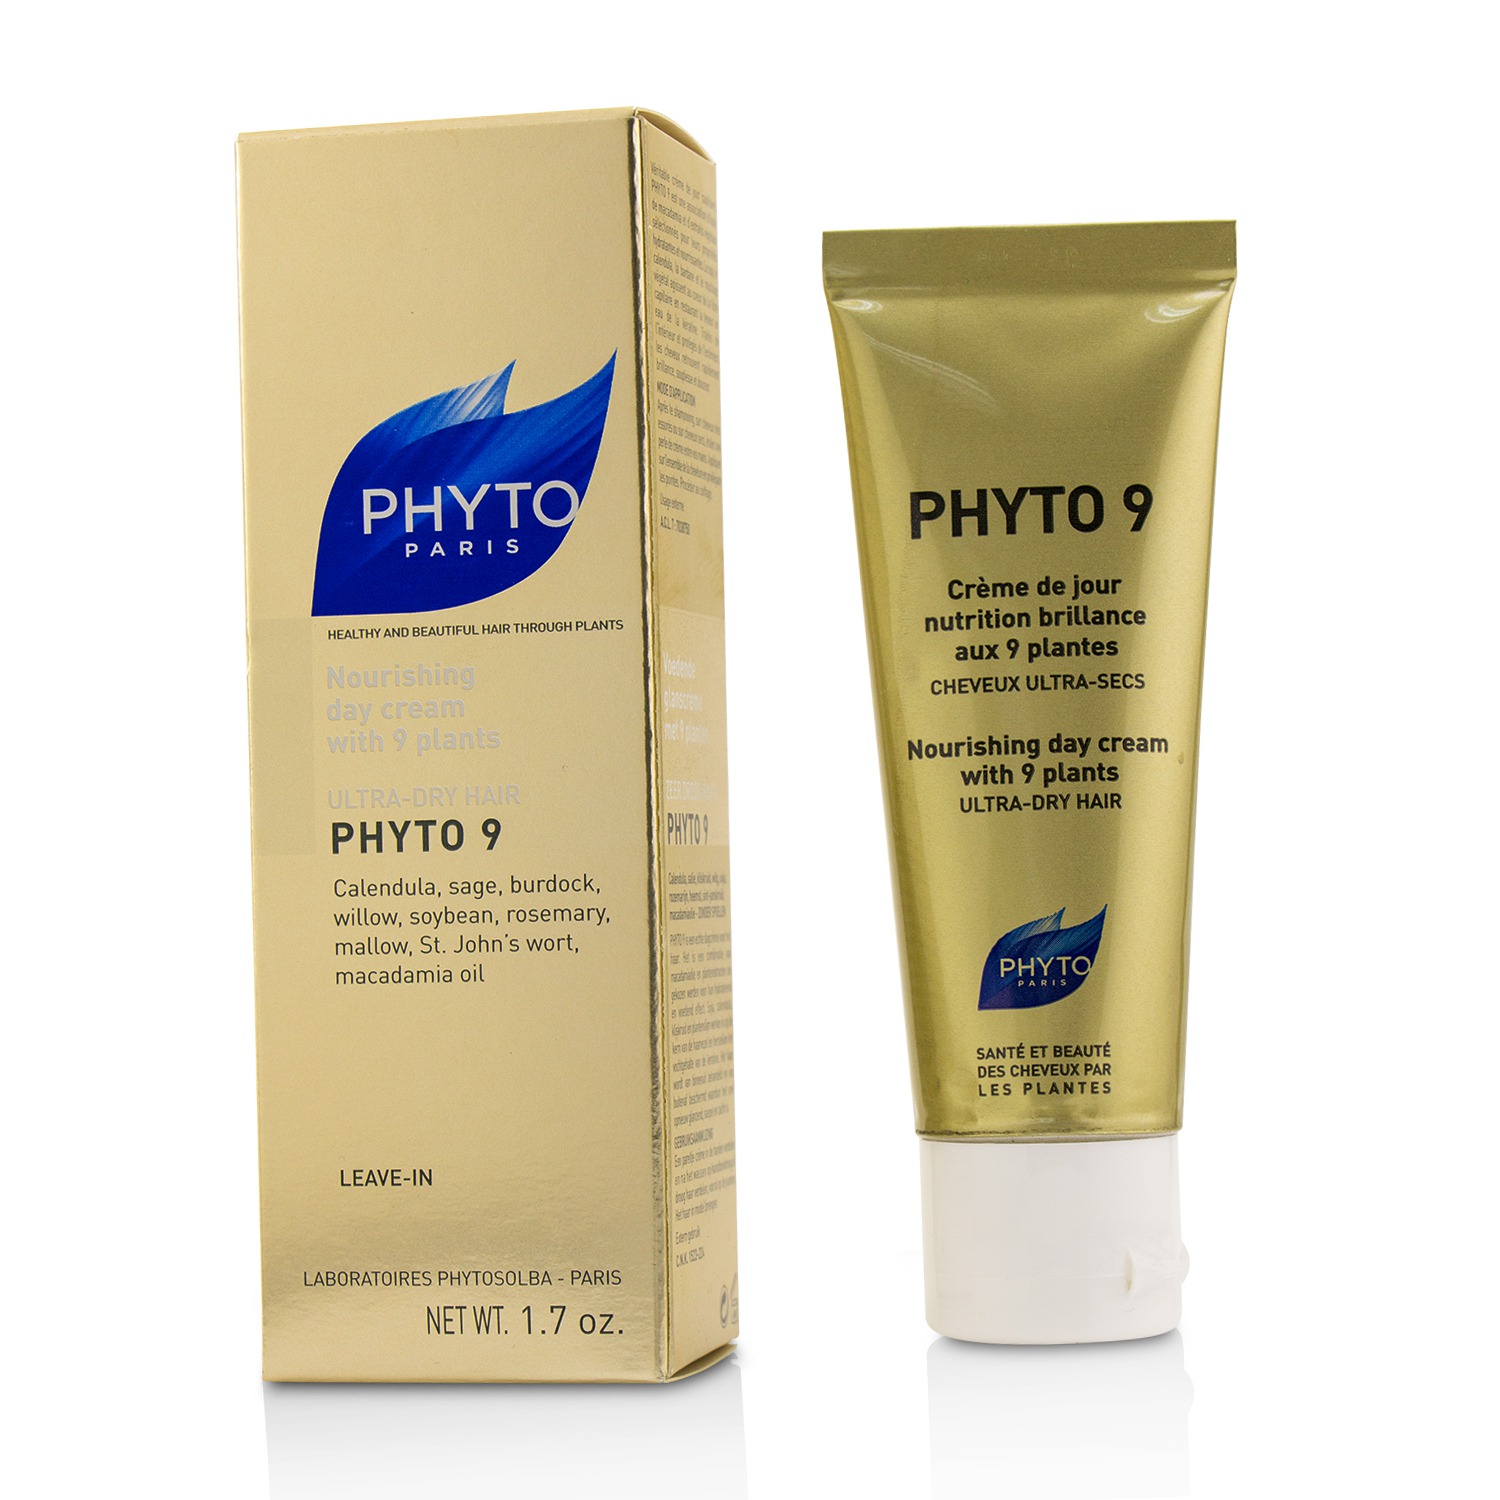 Phyto 9 Nourishing Day Cream with 9 Plants (Ultra-Dry Hair) Phyto Image